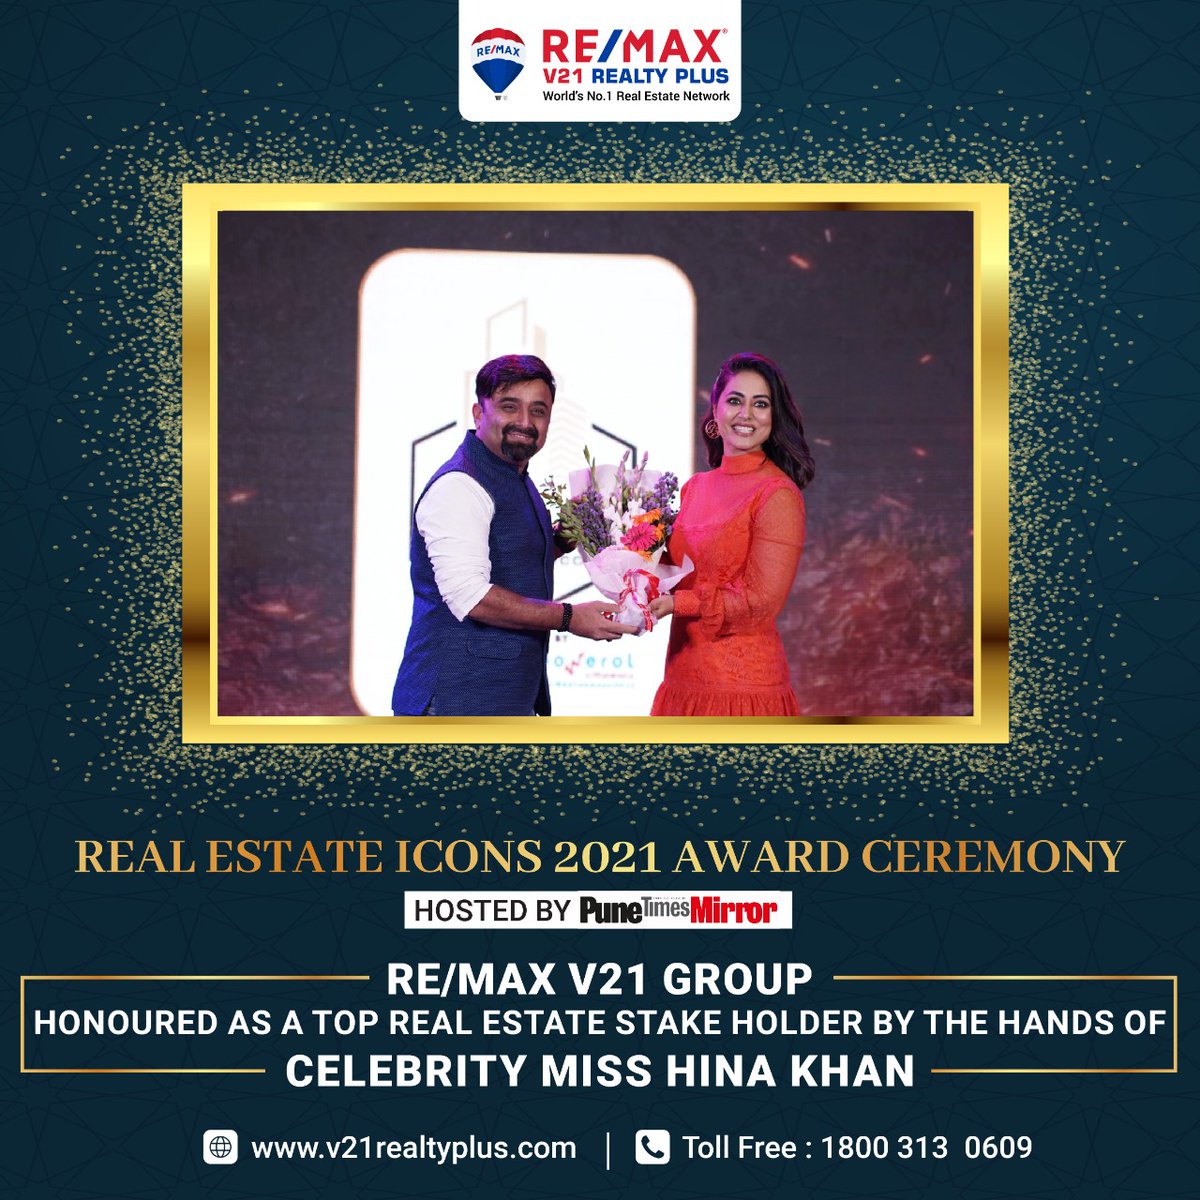 The Pune Times Mirror Real Estate Icons 2021 Awards Ceremony Was Co-Sponsored By V21 Group, held at Hotel Conrad, Pune !! Top real estate @RemaxV21  Group was Honoured by The Hands of  Celebrity Hina Khan. Proud Moment for V21 Group of company!!! 
#PuneTimesMirror #realestate